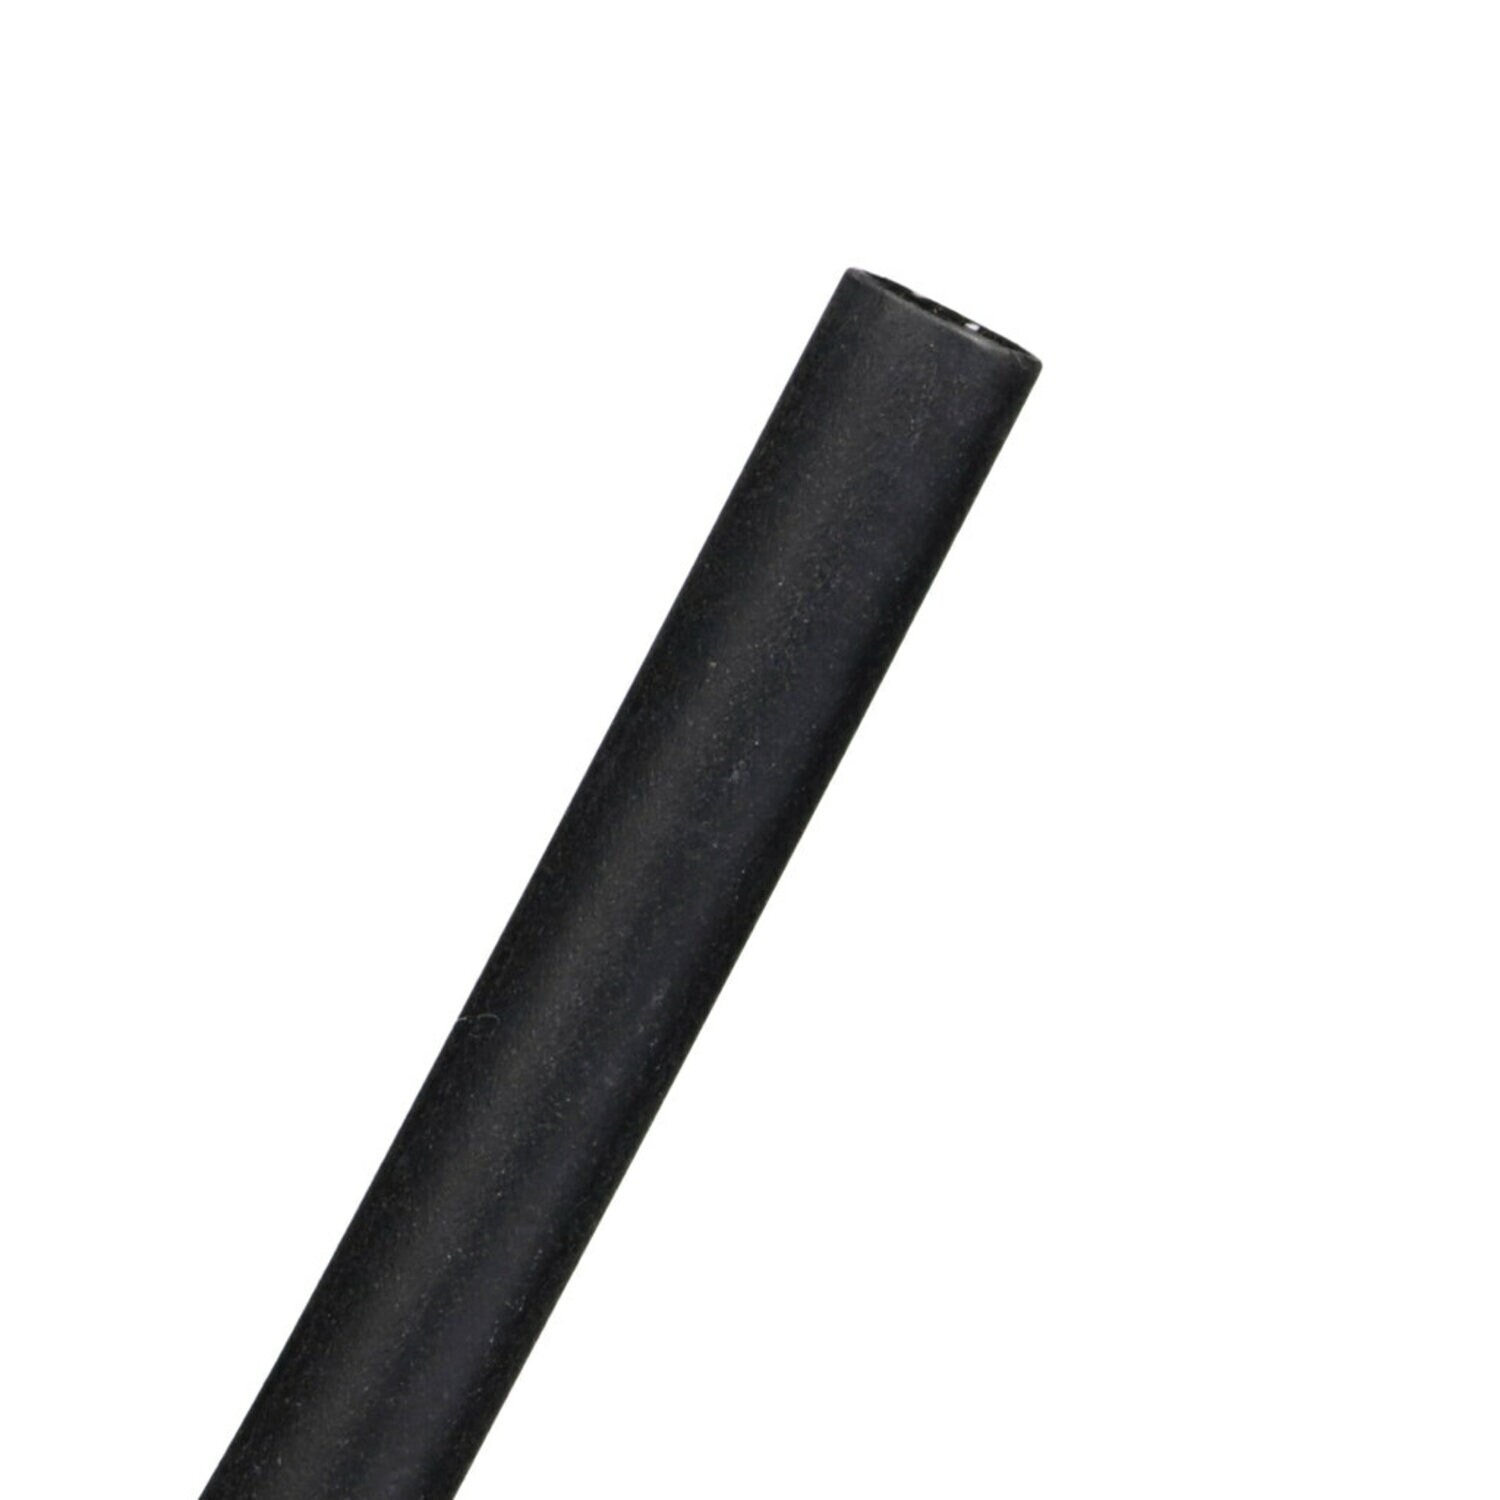 7000133580 - 3M Thin-Wall Heat Shrink Tubing EPS-300, Adhesive-Lined,
3/16-48"-Black-12 Pcs, 48 in length sticks, 12 pieces/case